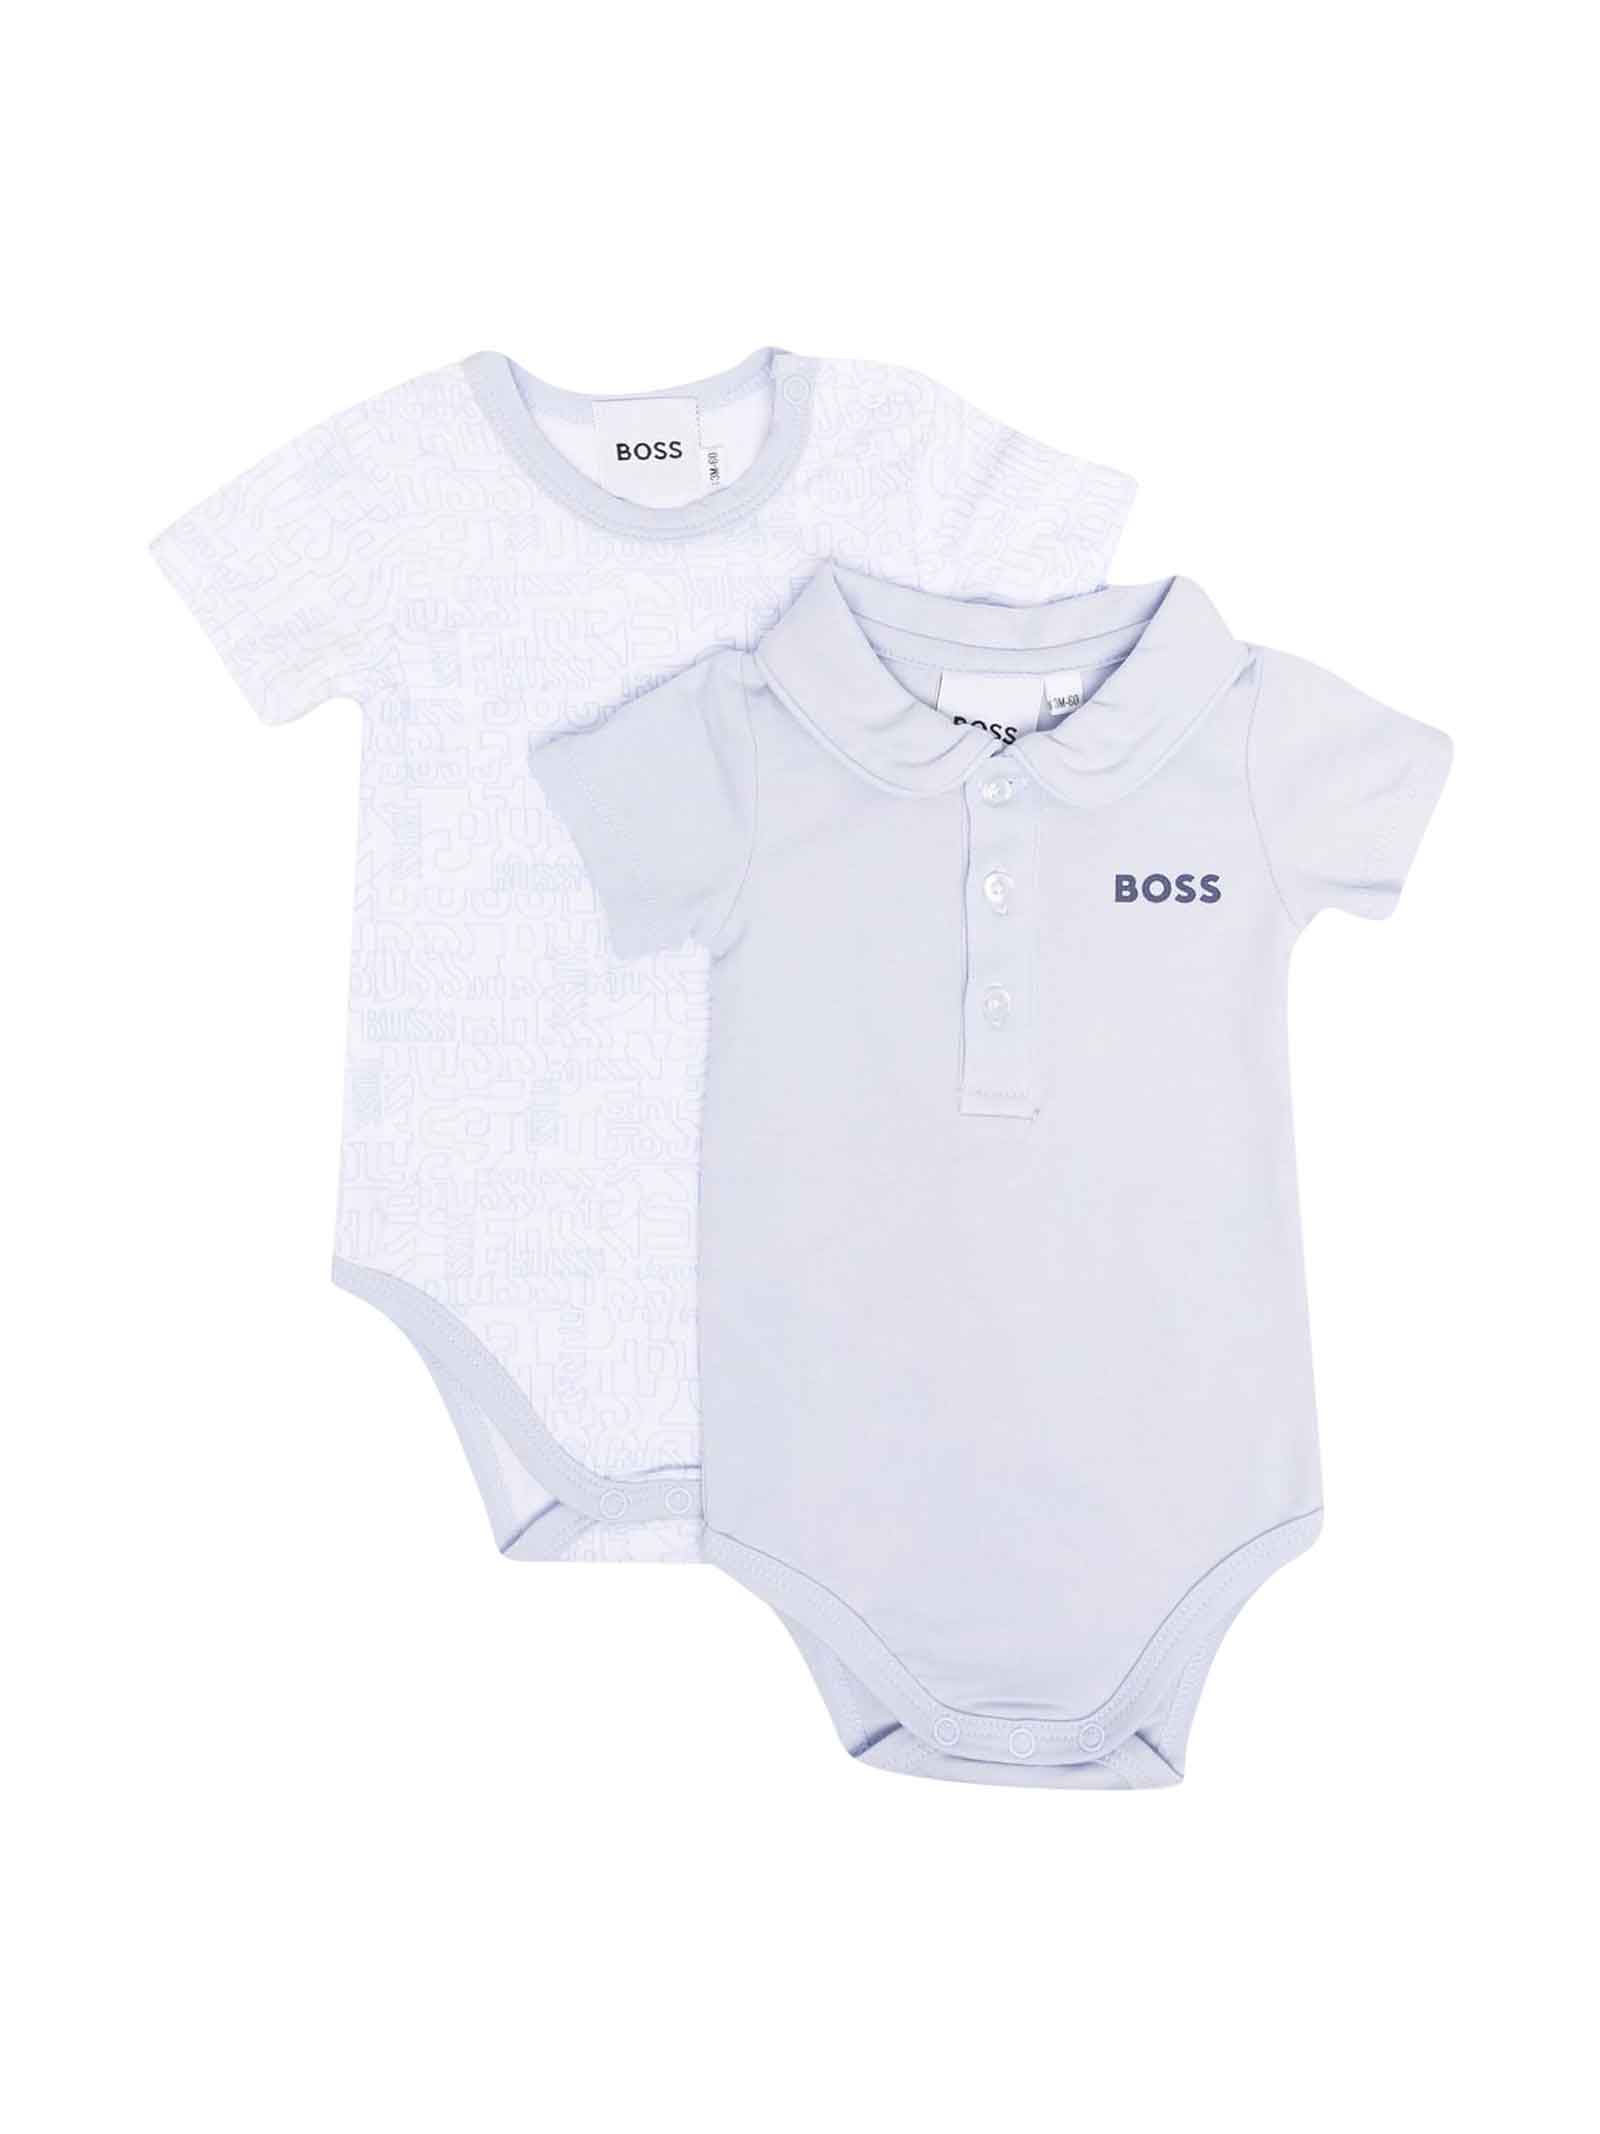 Hugo Boss Set Of Two White And Light Blue Baby Bodysuits With All-over Logo Print, Contrasting Edge, Round Neckline, Short Sleeves And Button Closure